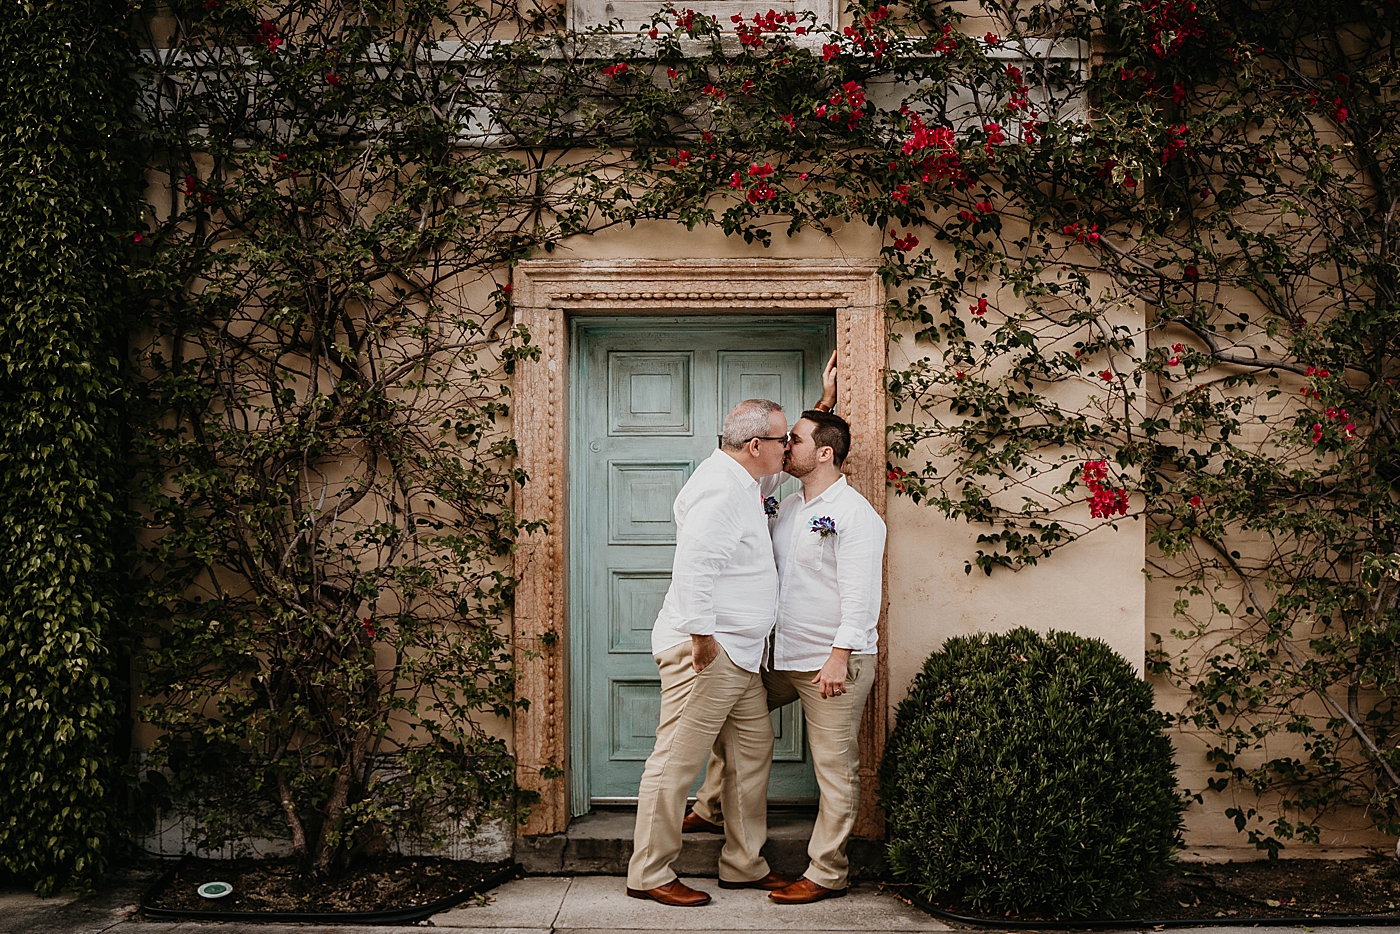 Grooms kissing in front of house Palm Beach Elopement Photography captured by South Florida Photographer Krystal Capone Photography 